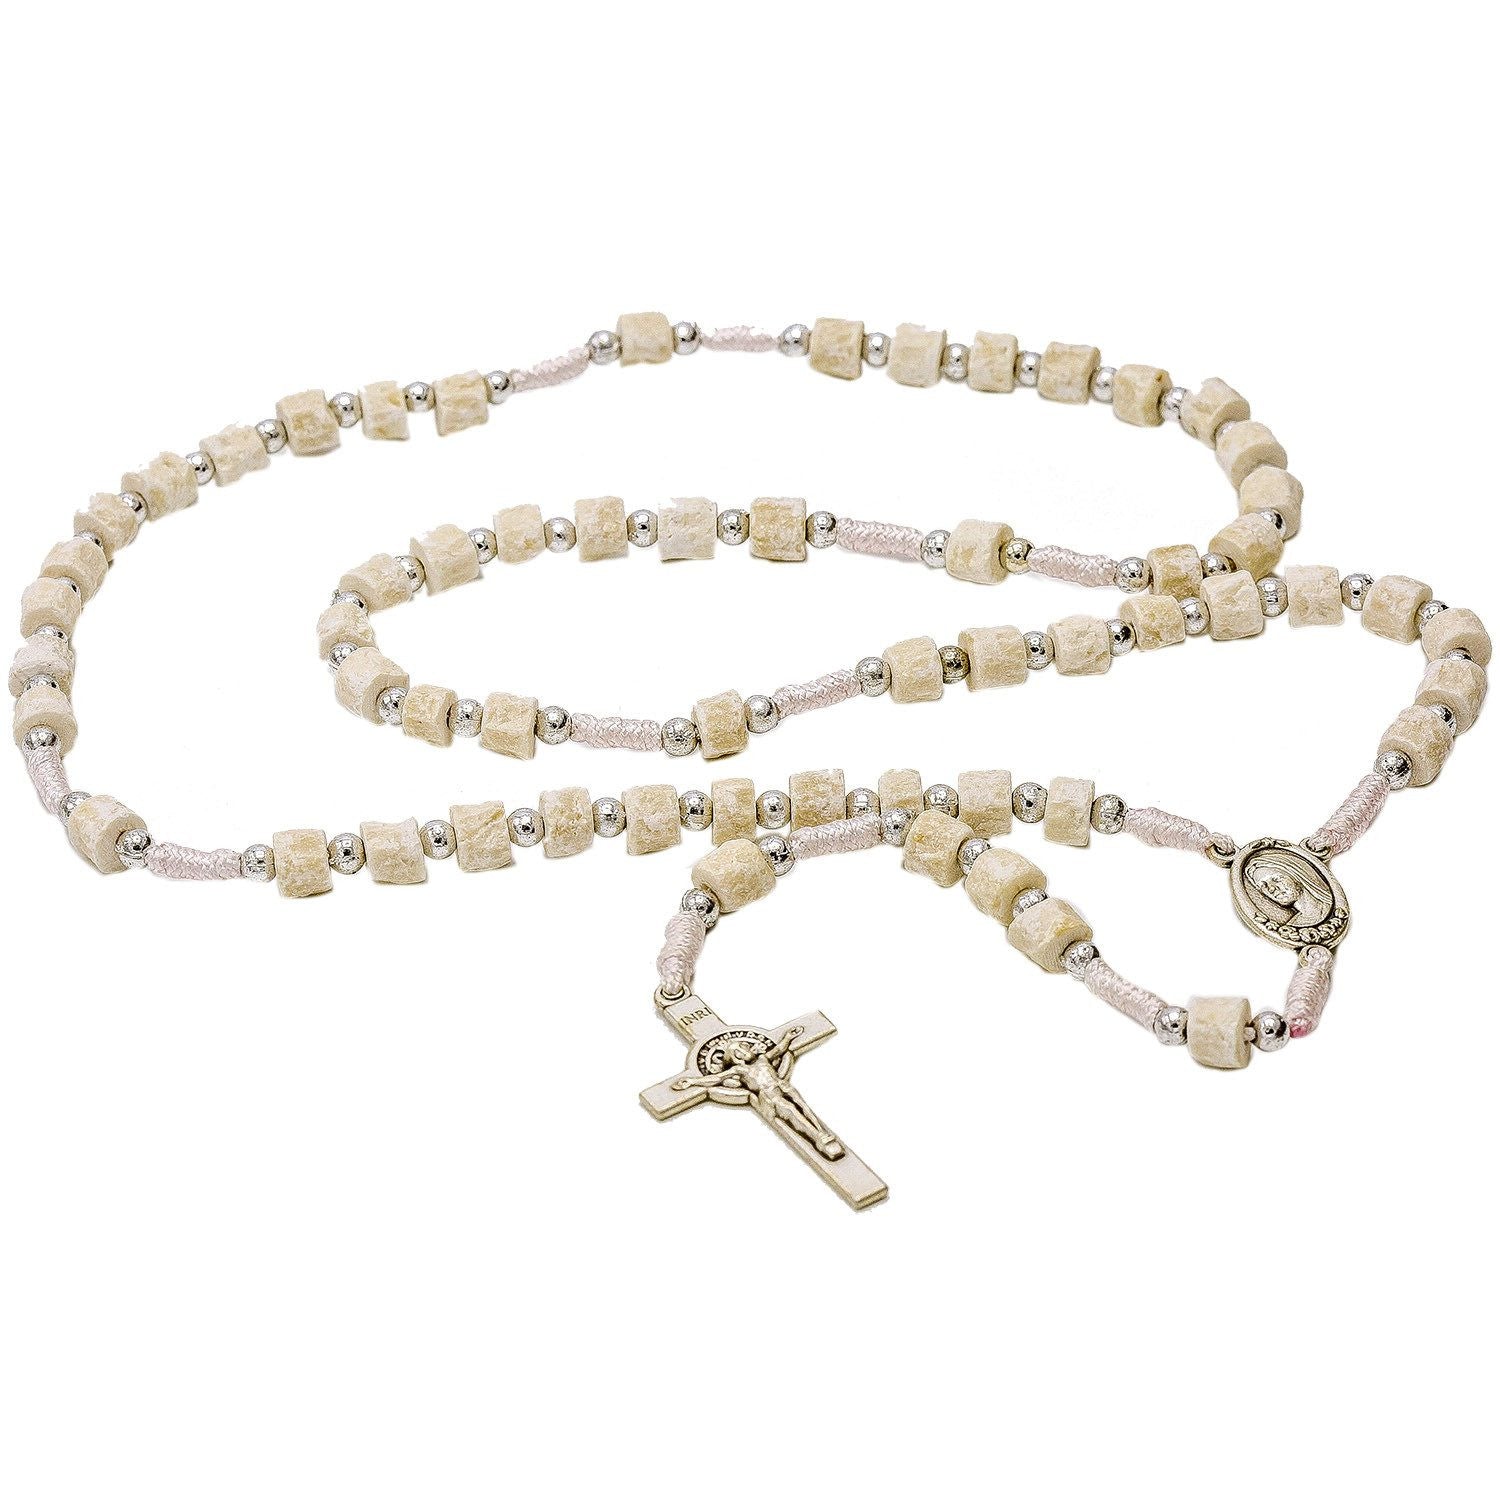 Medjugorje White Cord Rosary Our Lady of Medjugorje Medal and Saint Benedict Crucifix